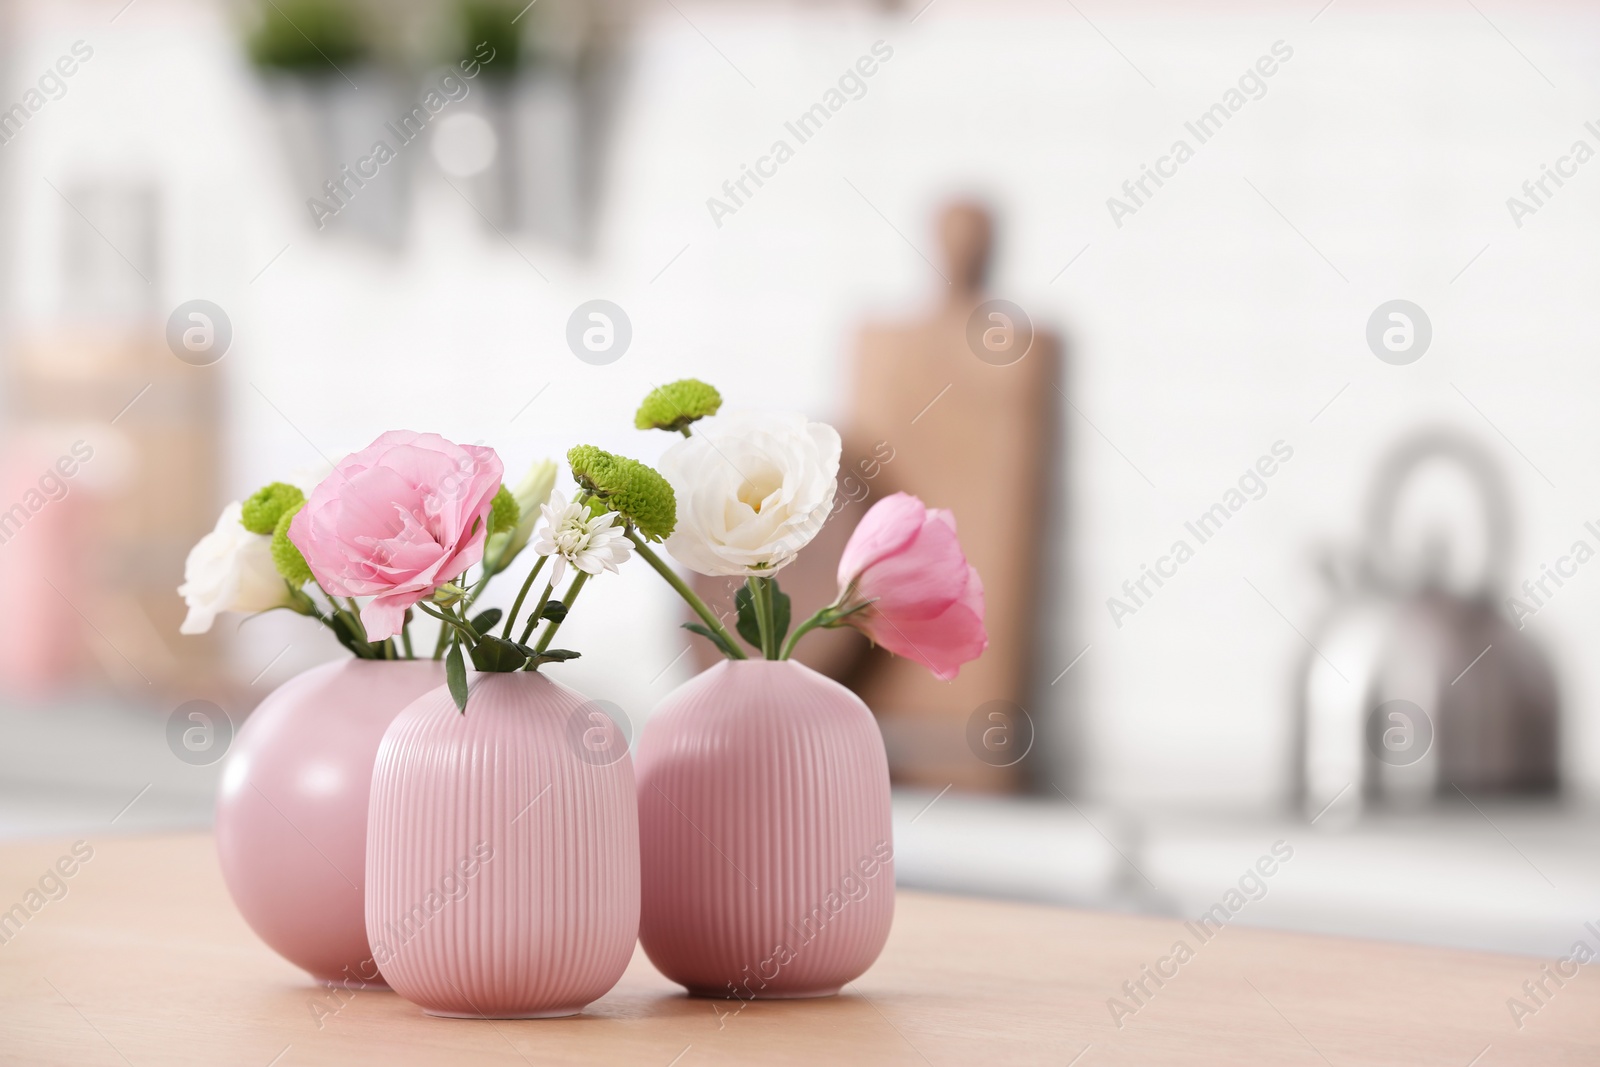 Photo of Vases with beautiful flowers on table in kitchen interior. Space for text